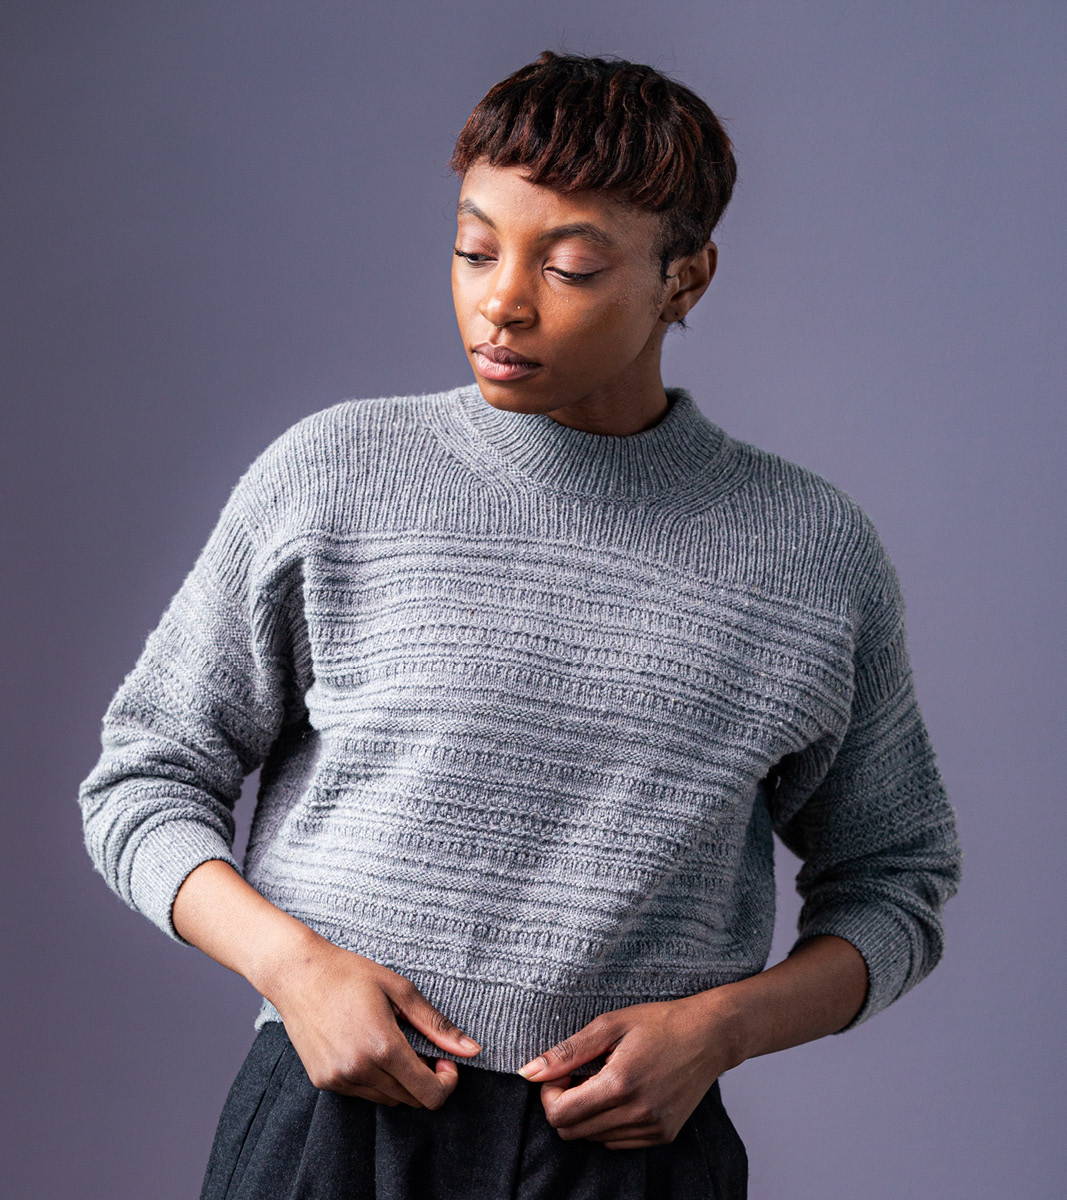 Maya, a woman with short brown hair, models Brooklyn Tweed's Grist Pullover hand knit in Imbue Sport yarn color Ash